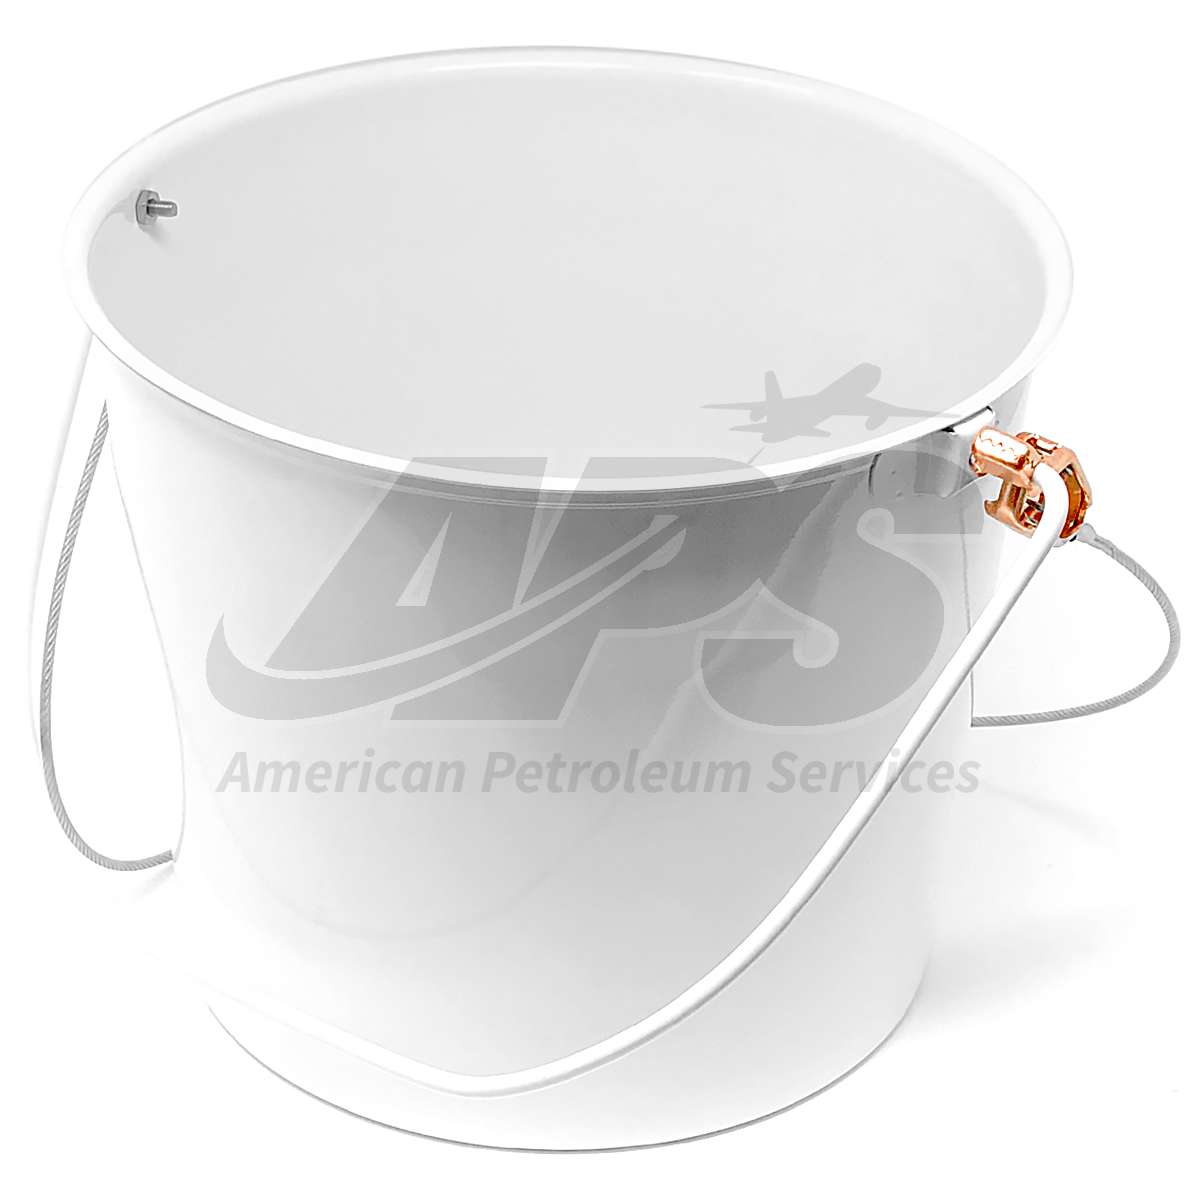 EPOXY COATED FUEL SAMPLING WHITE TEST BUCKET (2-1/4 GAL, W/ GROUNDING CABLE)